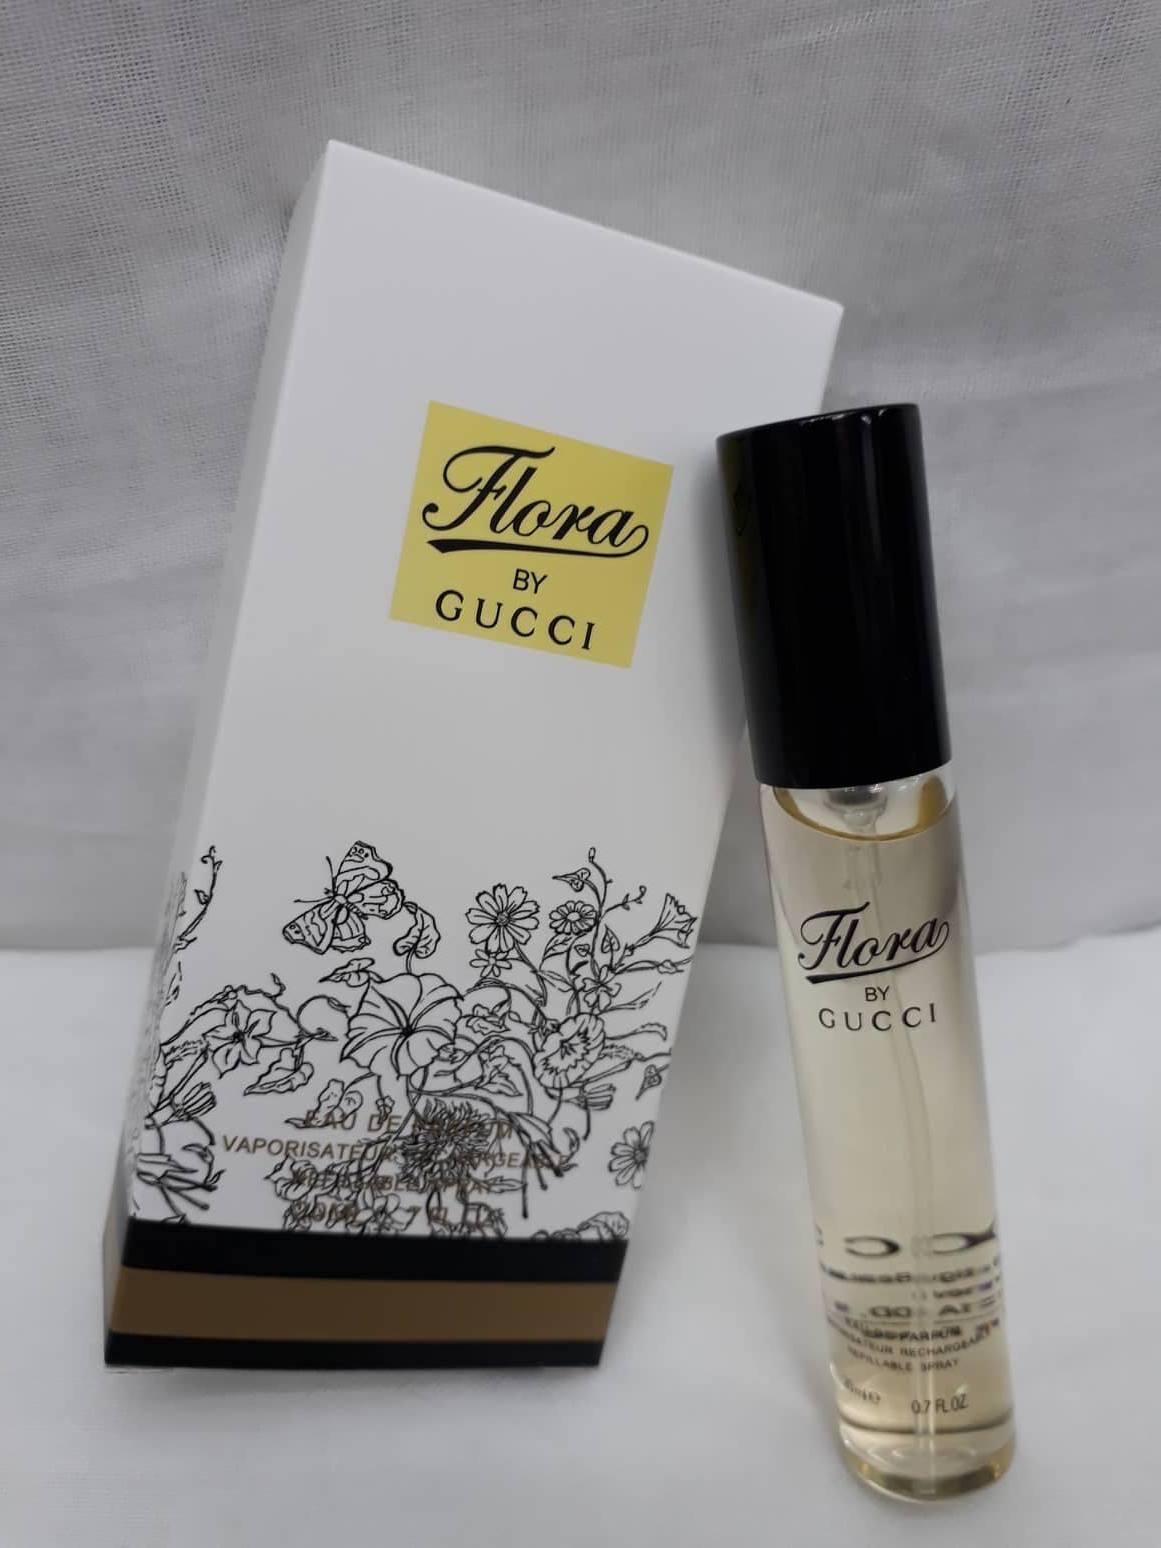 flora by gucci 20ml